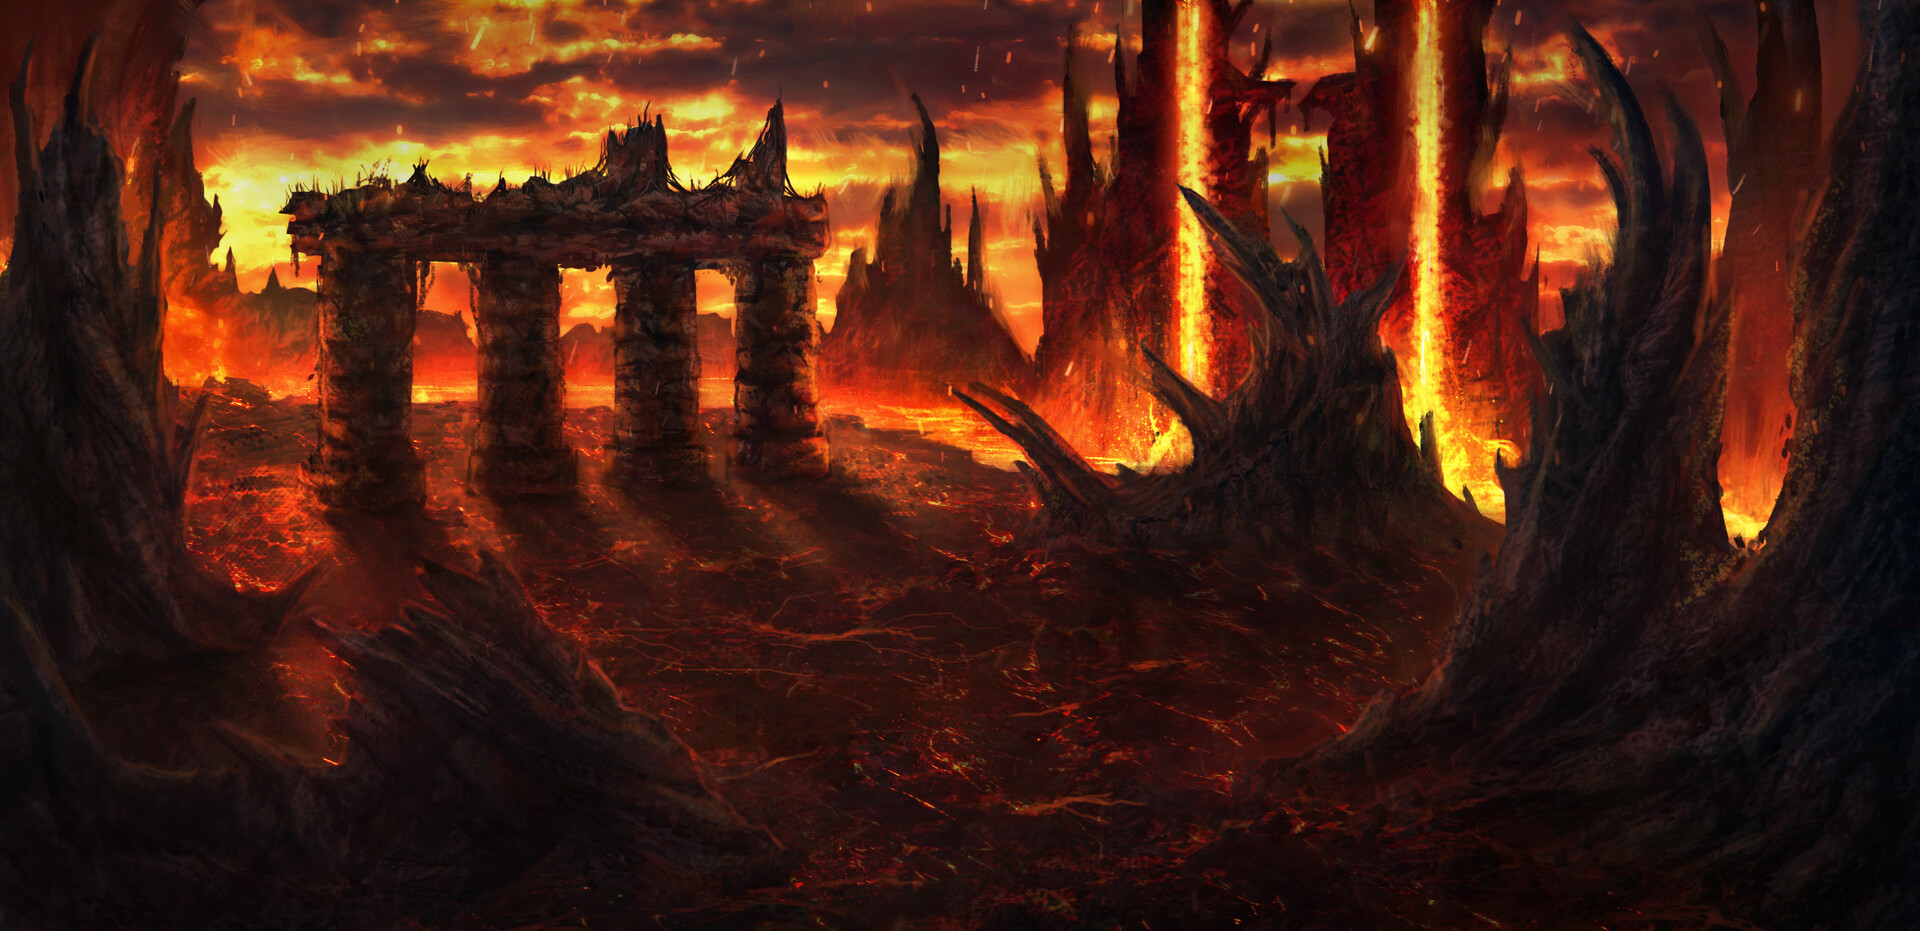 Hell Throne Images  Free Download on Freepik